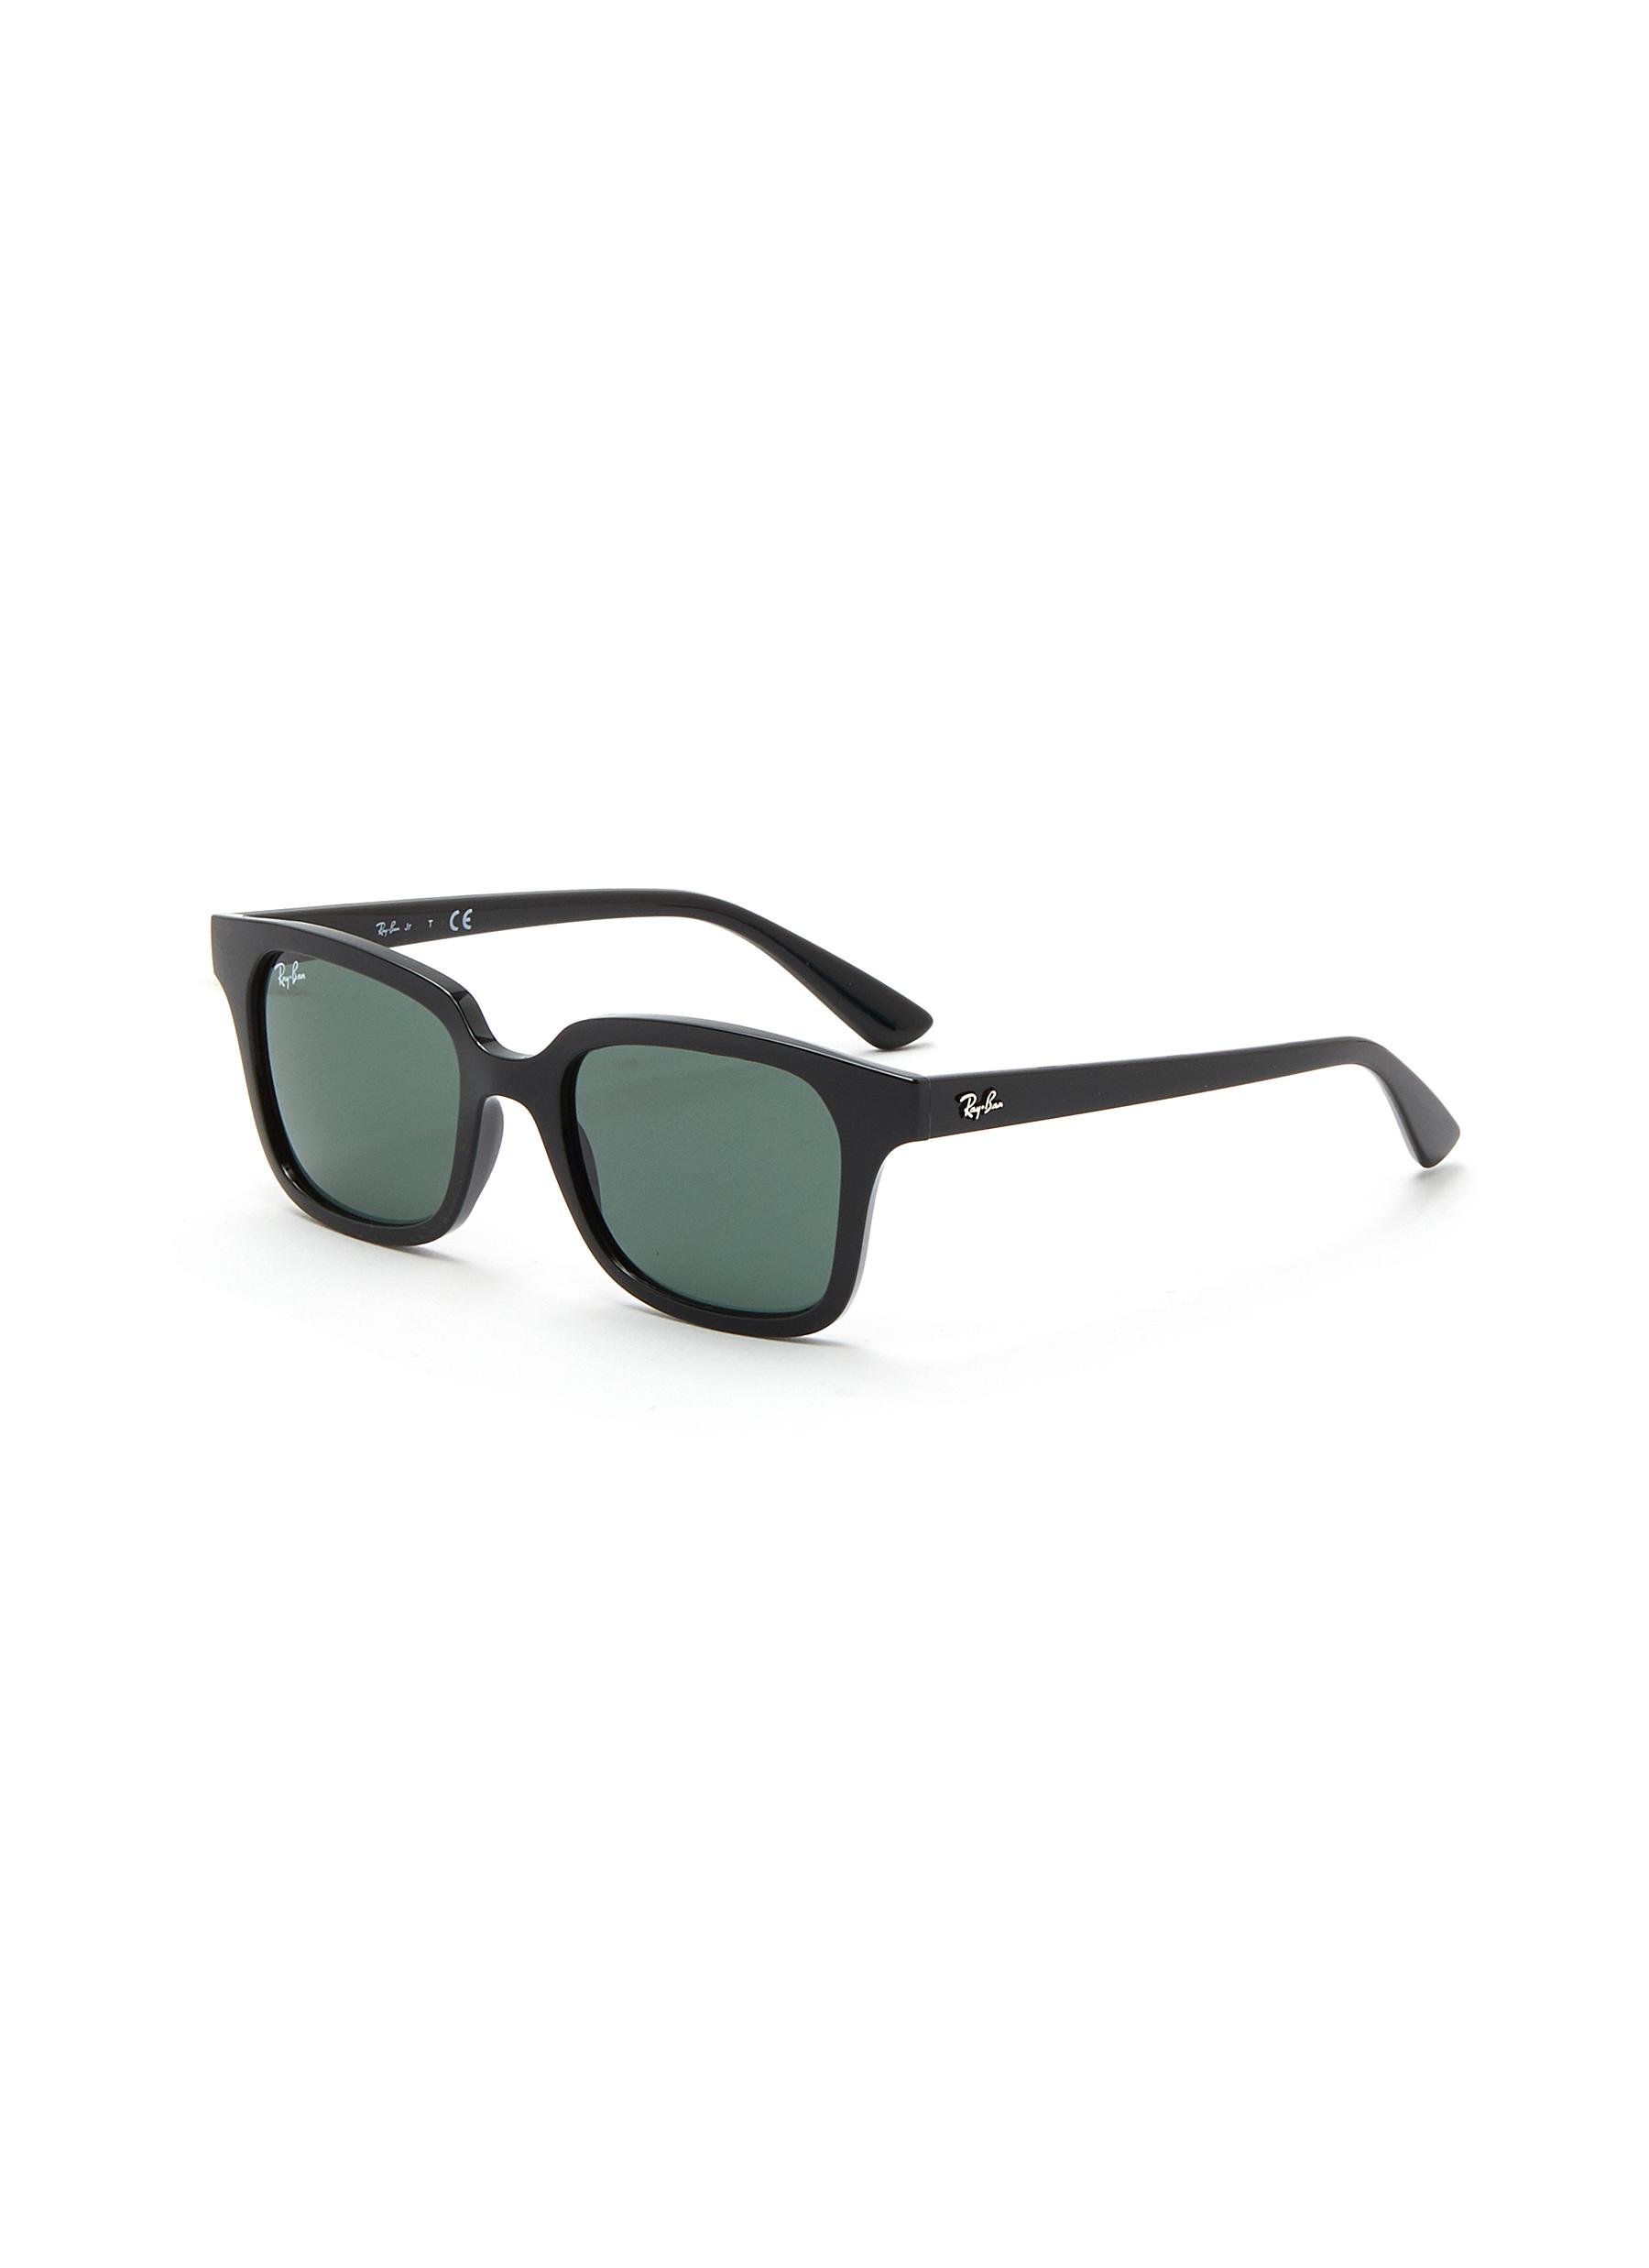 what are ray ban junior sunglasses